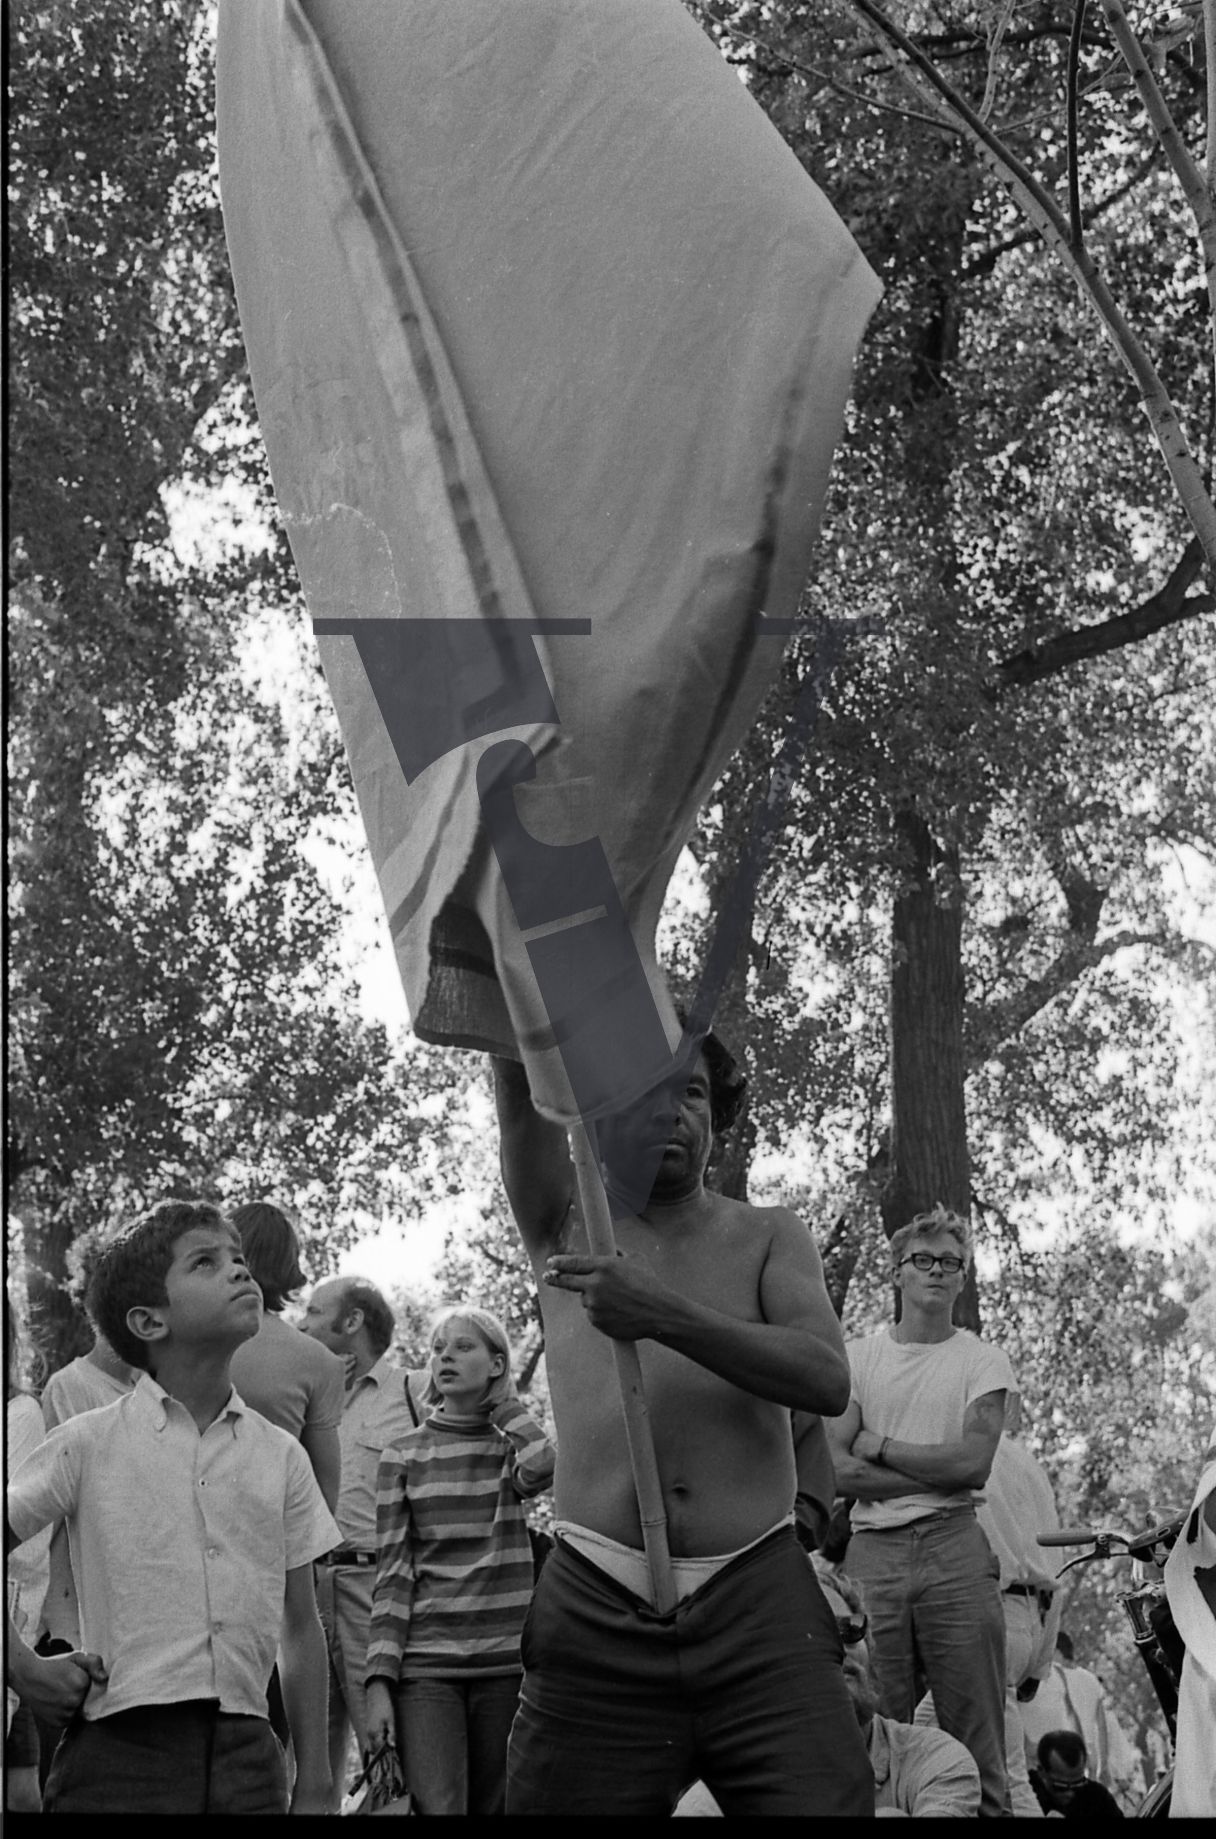 Chicago, Anti-war rallies in Lincoln Park, man with flag stares at camera, boy looks on.